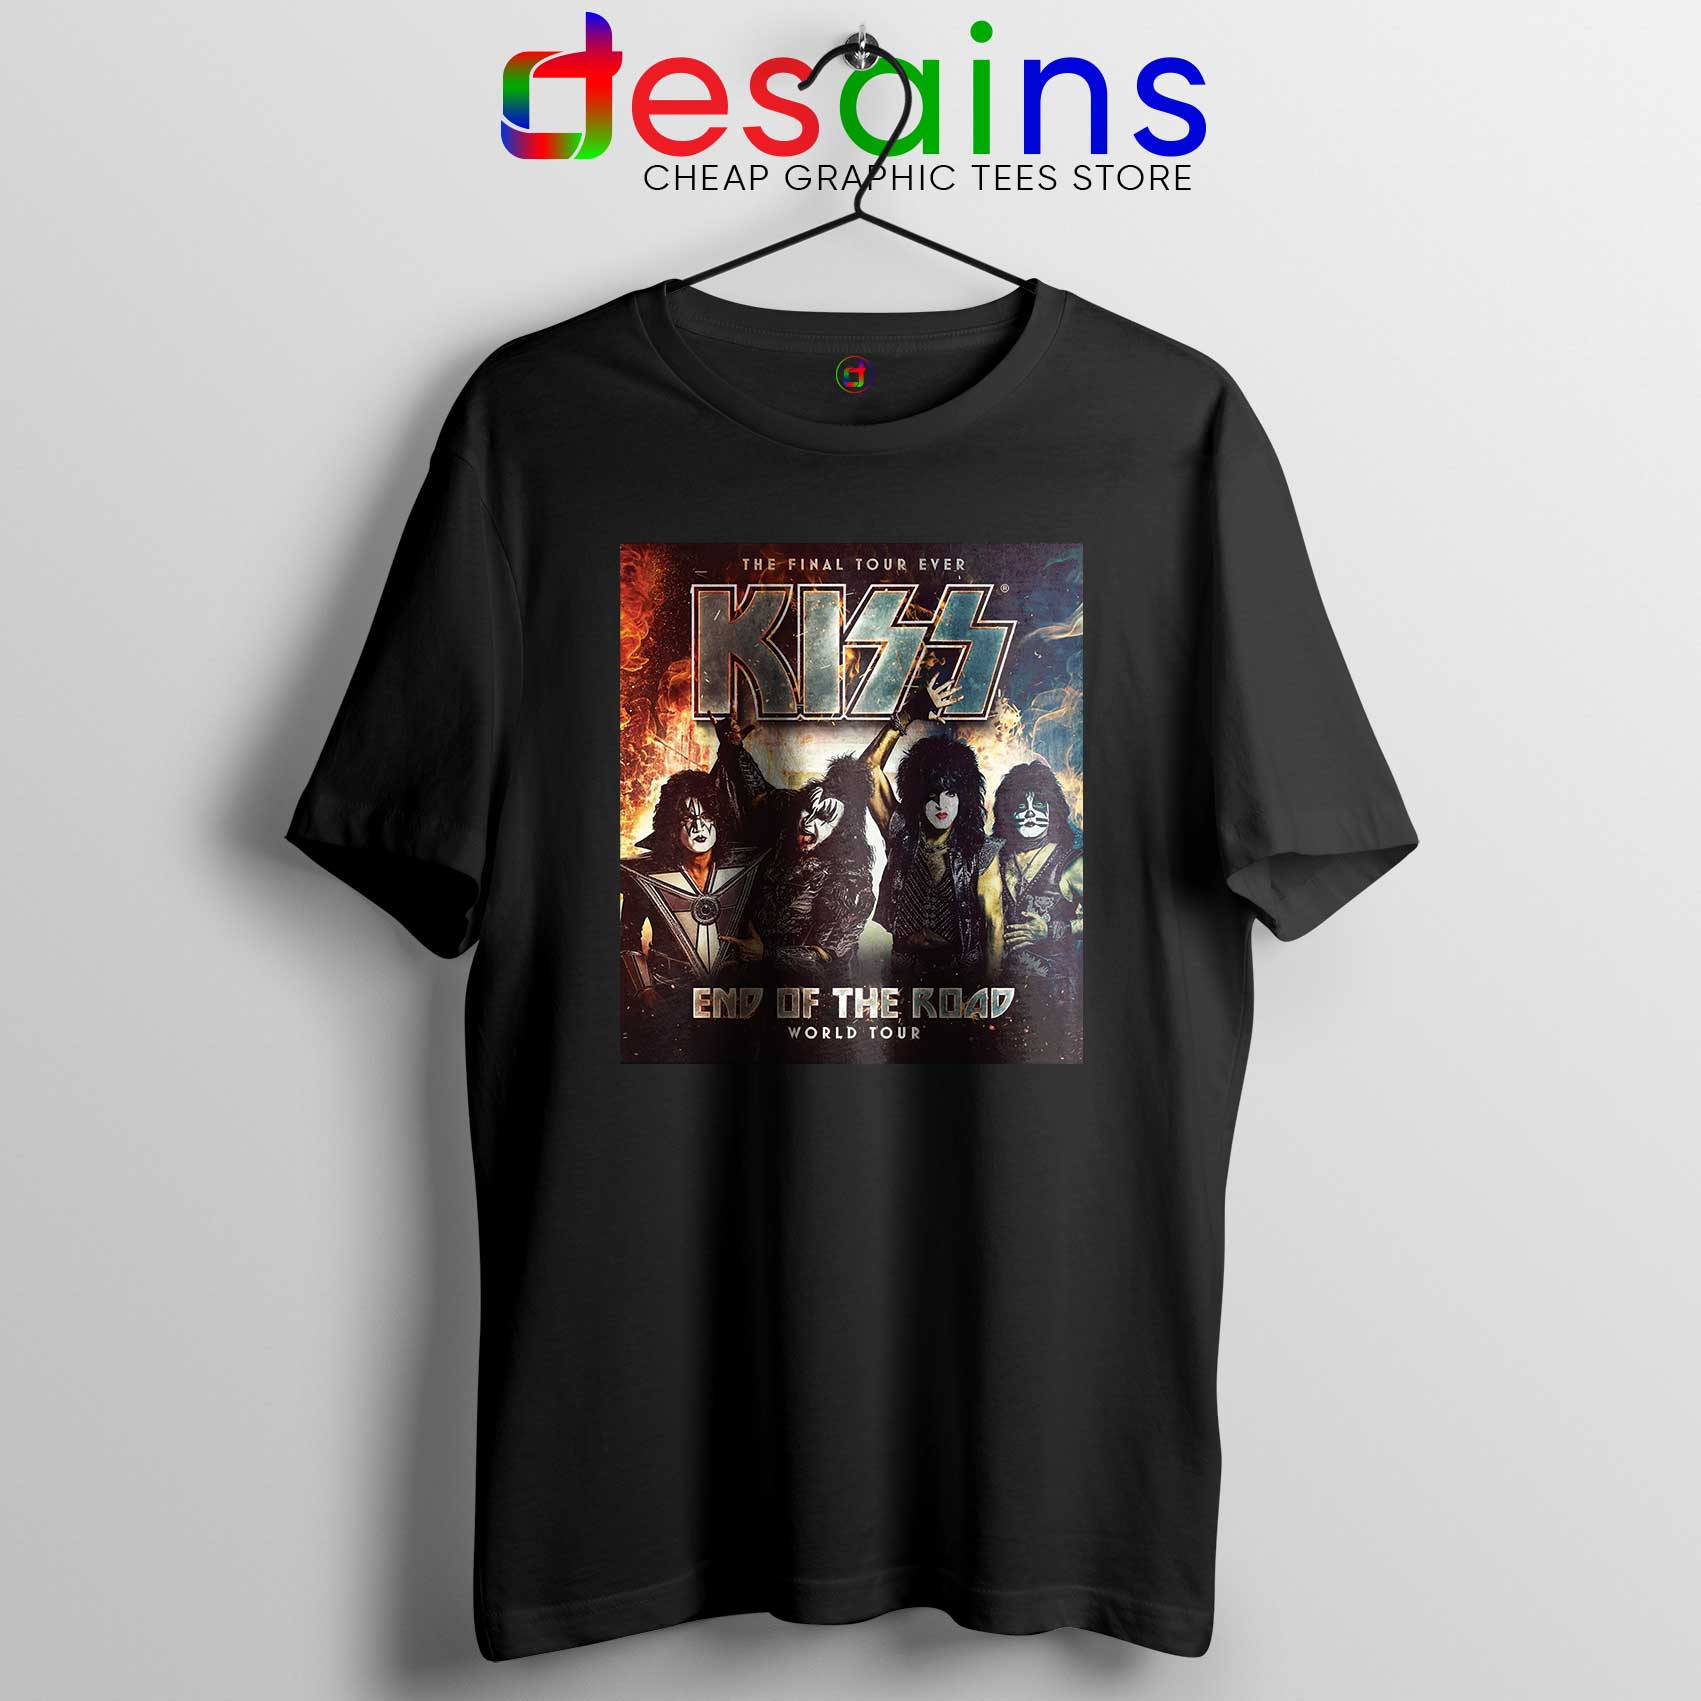 Kiss End of the Road Tour T Shirt 